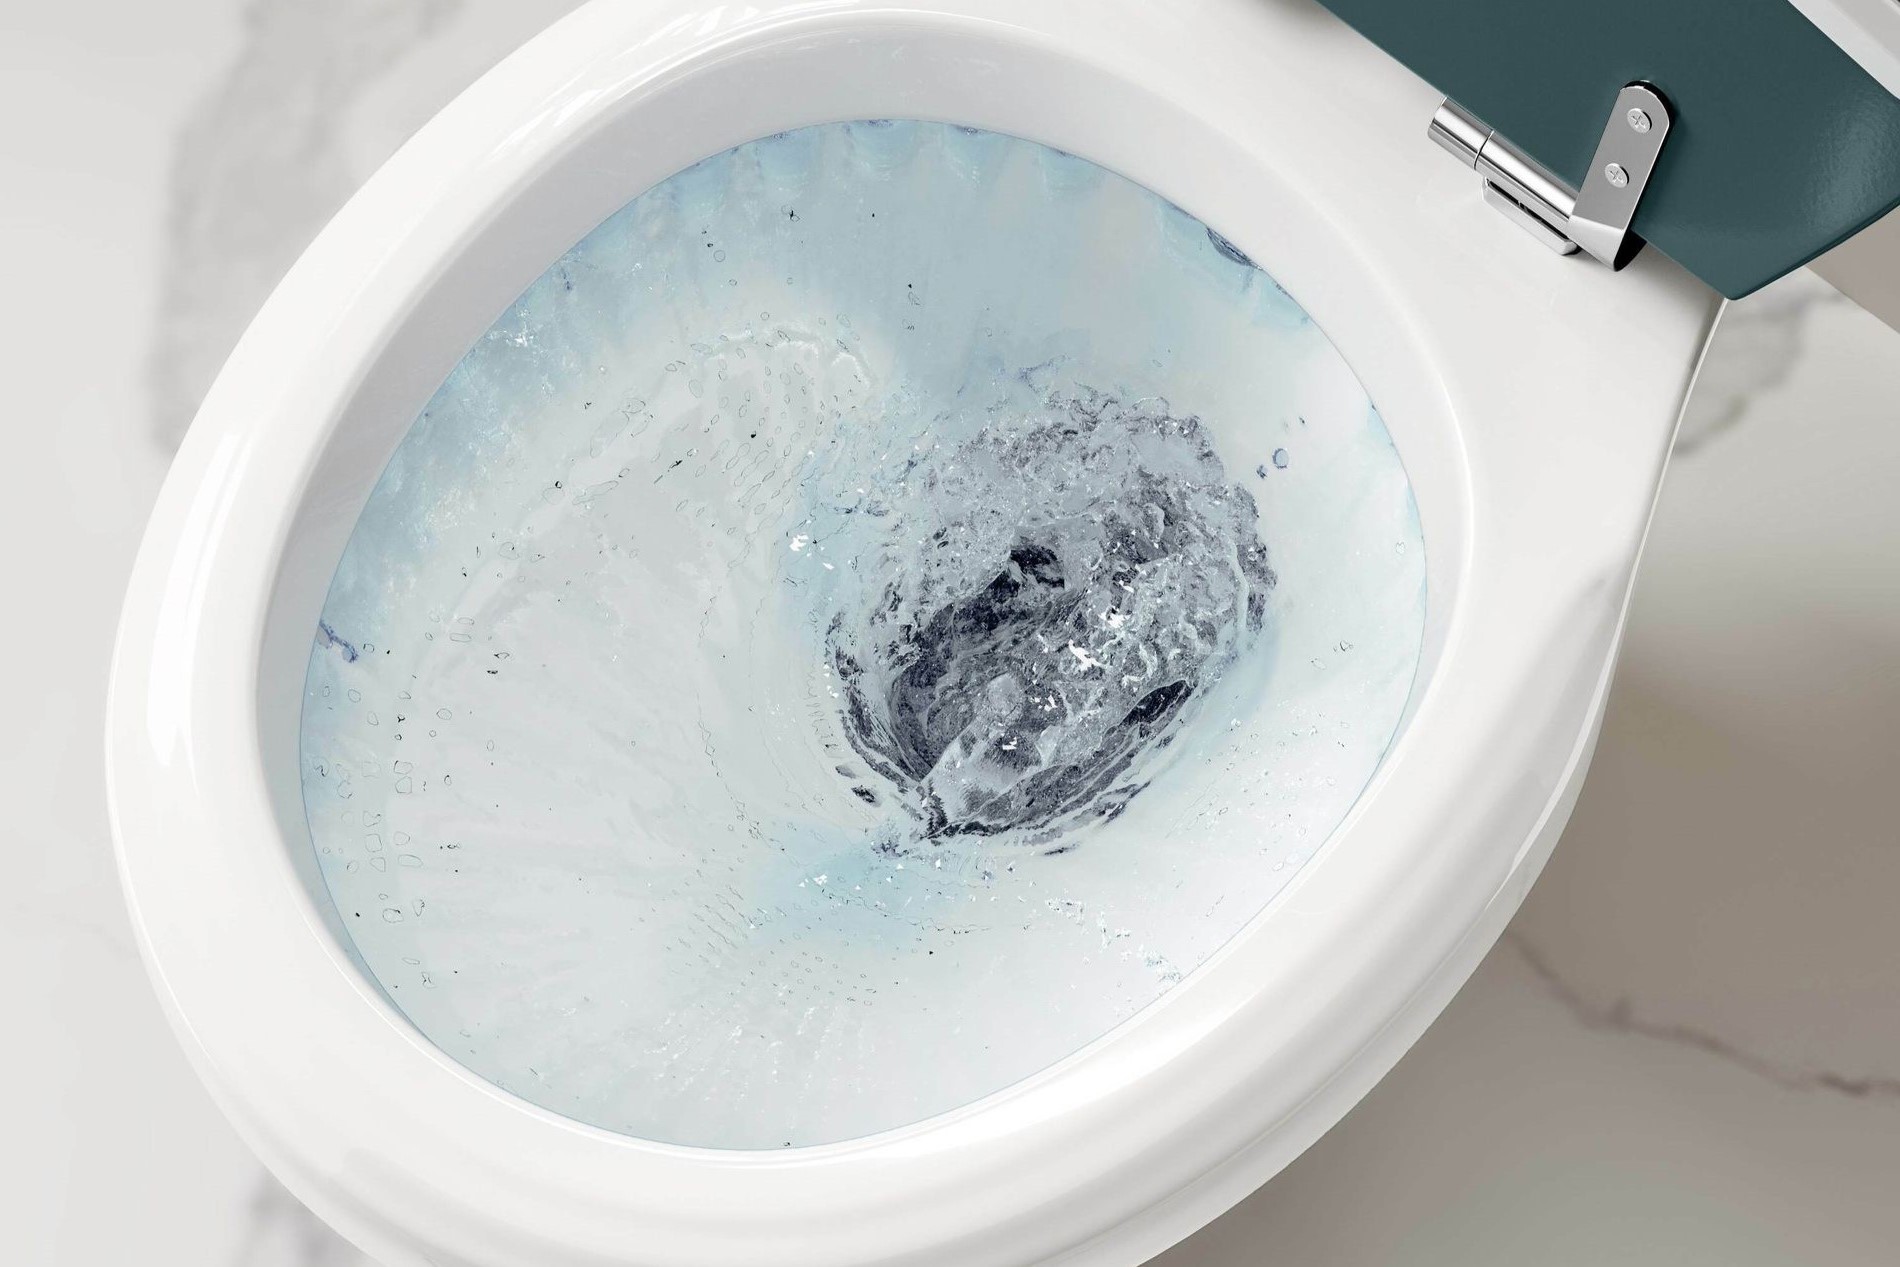 How To Adjust Water Level In Toilet Bowl